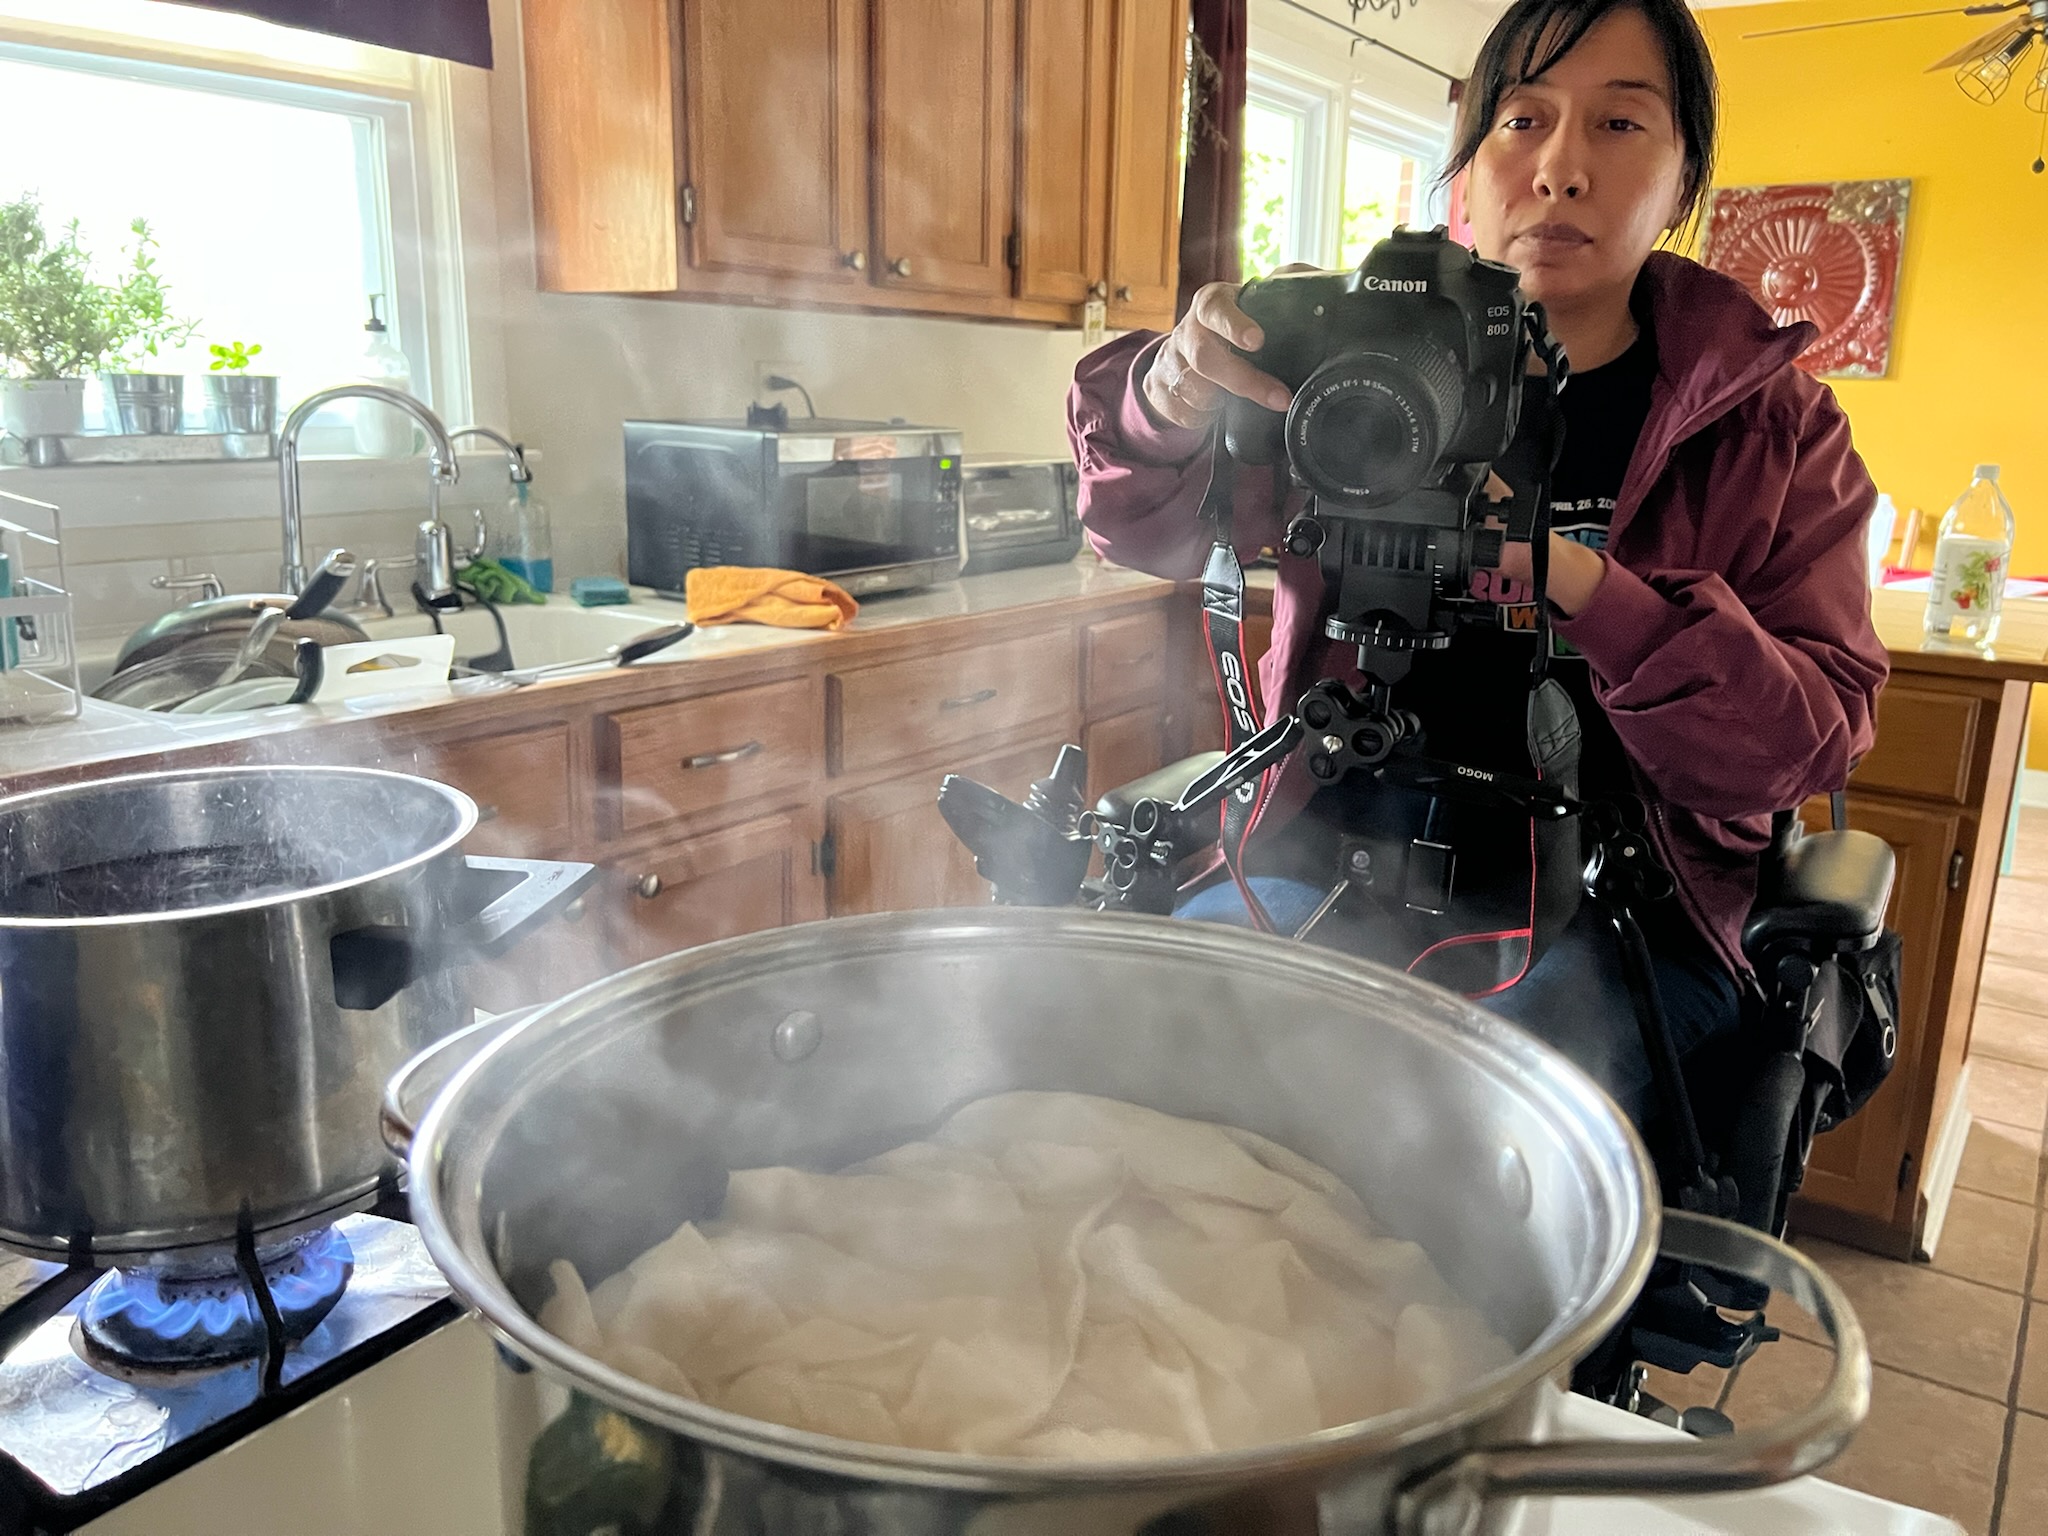 Reveca Torres is a Mexican-American female filmmaker, seen here filming in a kitchen. She is wearing a maroon sweatshirt, and operating a camera on her wheelchair. Image courtesy of Reveca Torres.